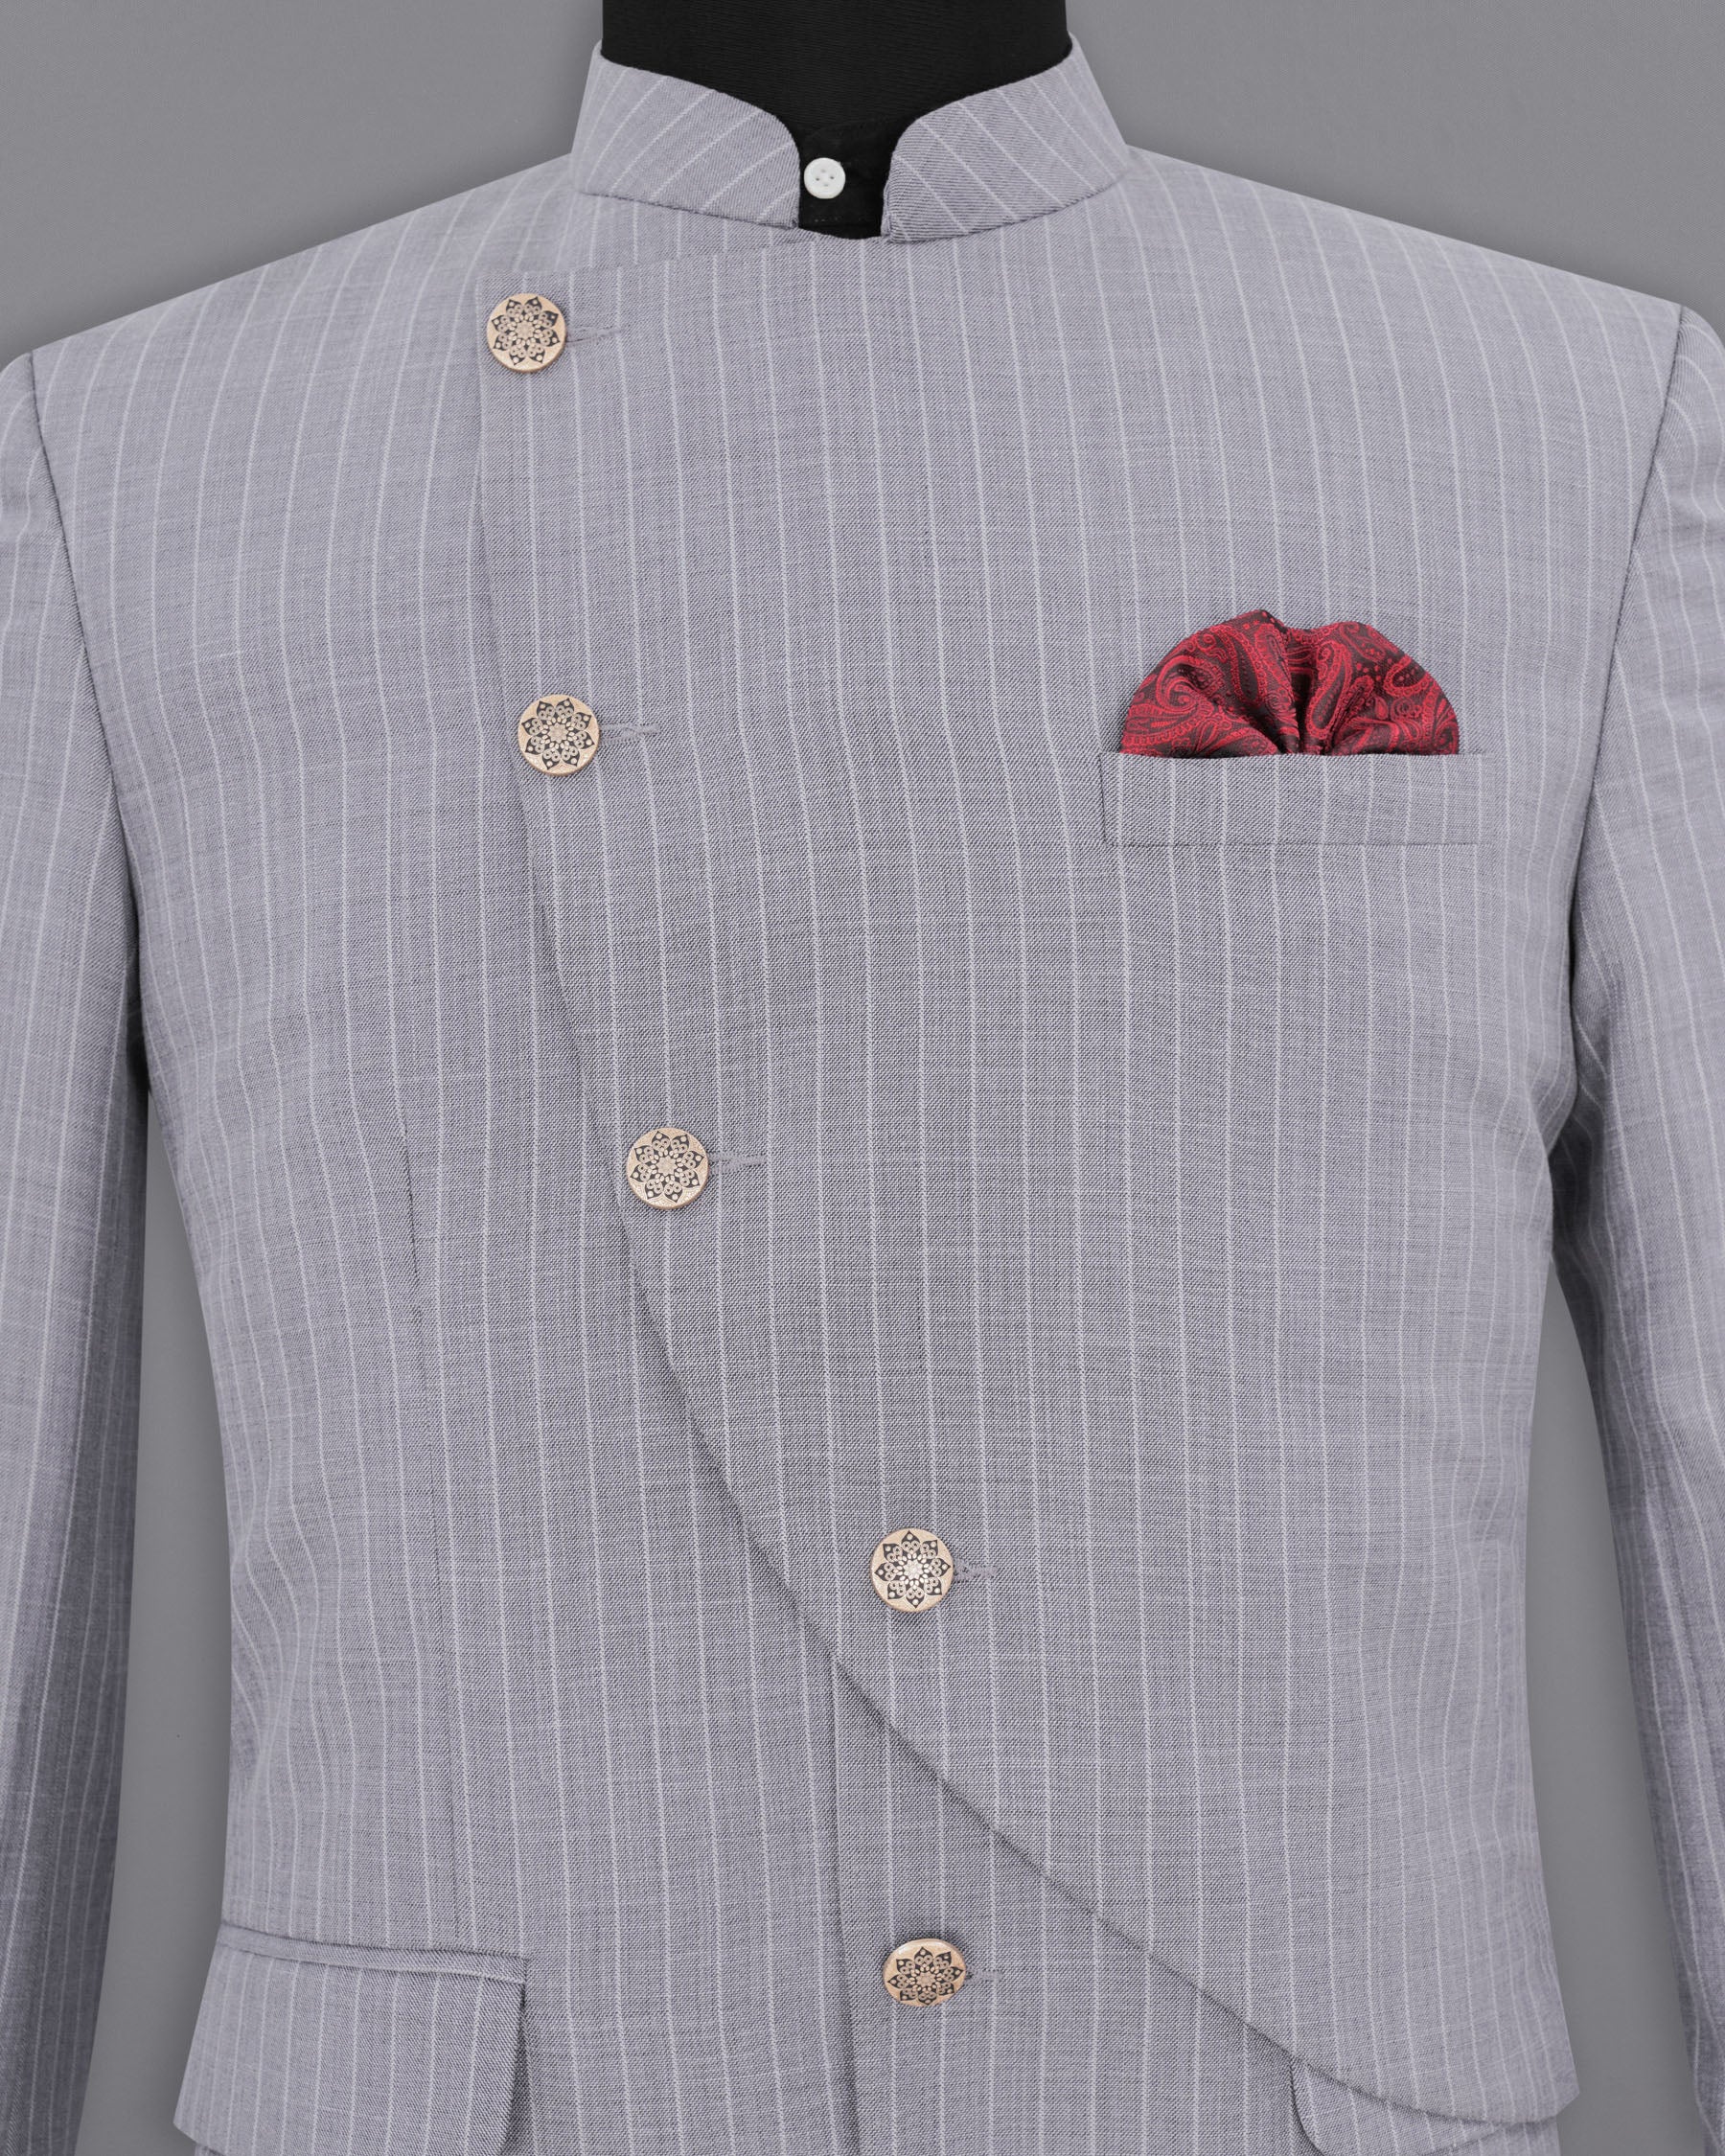 Mobster Grey Striped Cross Buttoned Bandhgala Designer Suits ST1905-CBG-D44-36, ST1905-CBG-D44-38, ST1905-CBG-D44-40, ST1905-CBG-D44-42, ST1905-CBG-D44-44, ST1905-CBG-D44-46, ST1905-CBG-D44-48, ST1905-CBG-D44-50, ST1905-CBG-D44-52, ST1905-CBG-D44-54, ST1905-CBG-D44-56, ST1905-CBG-D44-58, ST1905-CBG-D44-60